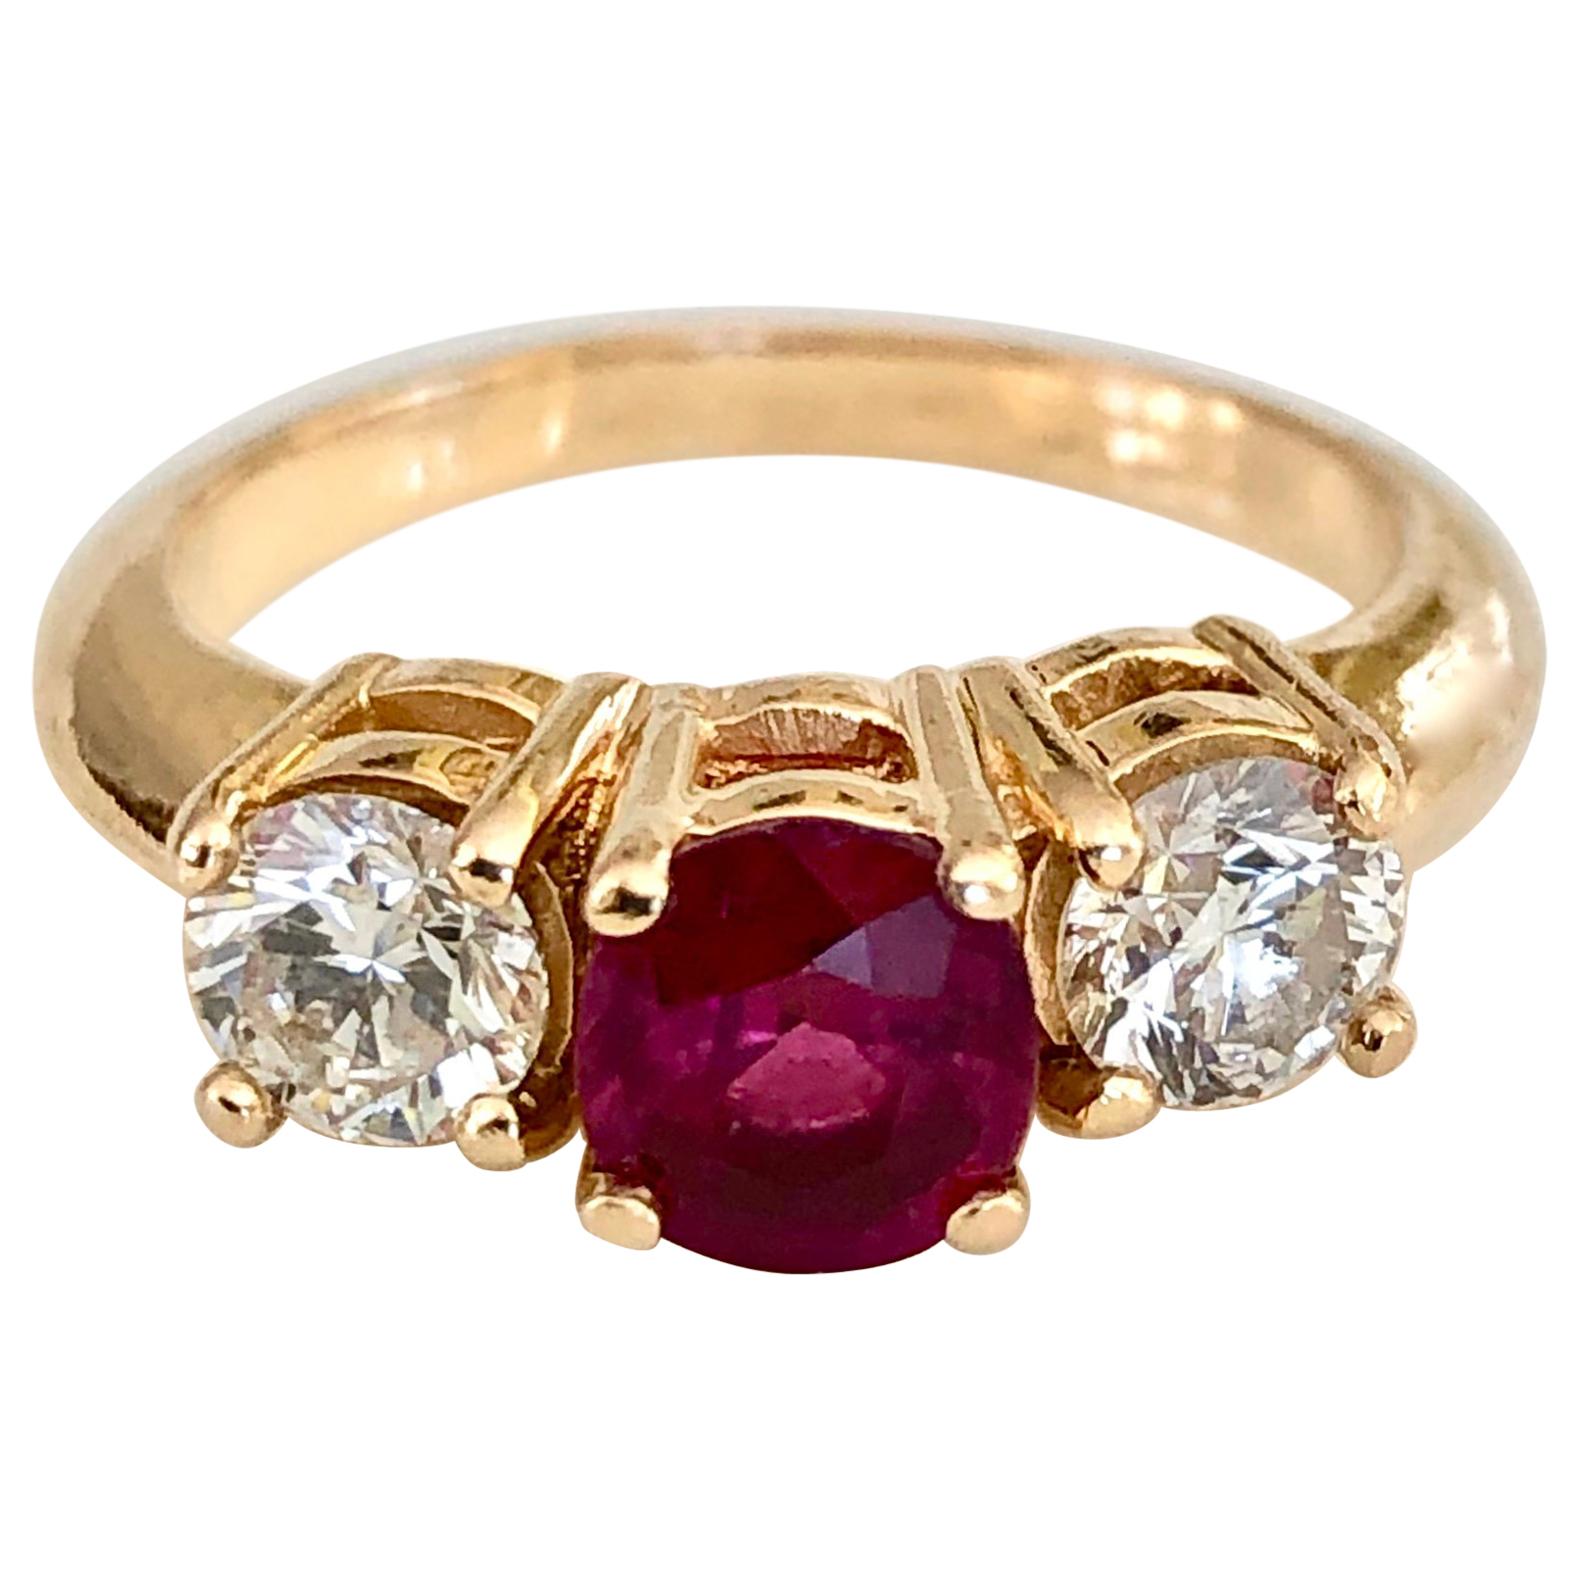 A classic trilogy engagement ring stars a natural deep, rich red ruby weighing 1.04 carat flanked by a matched pair of brilliant-cut diamonds G-H/VS2-SI1 weighing over 0.72 carats. This elegant ring is crafted in a timeless, traditional style of 18K